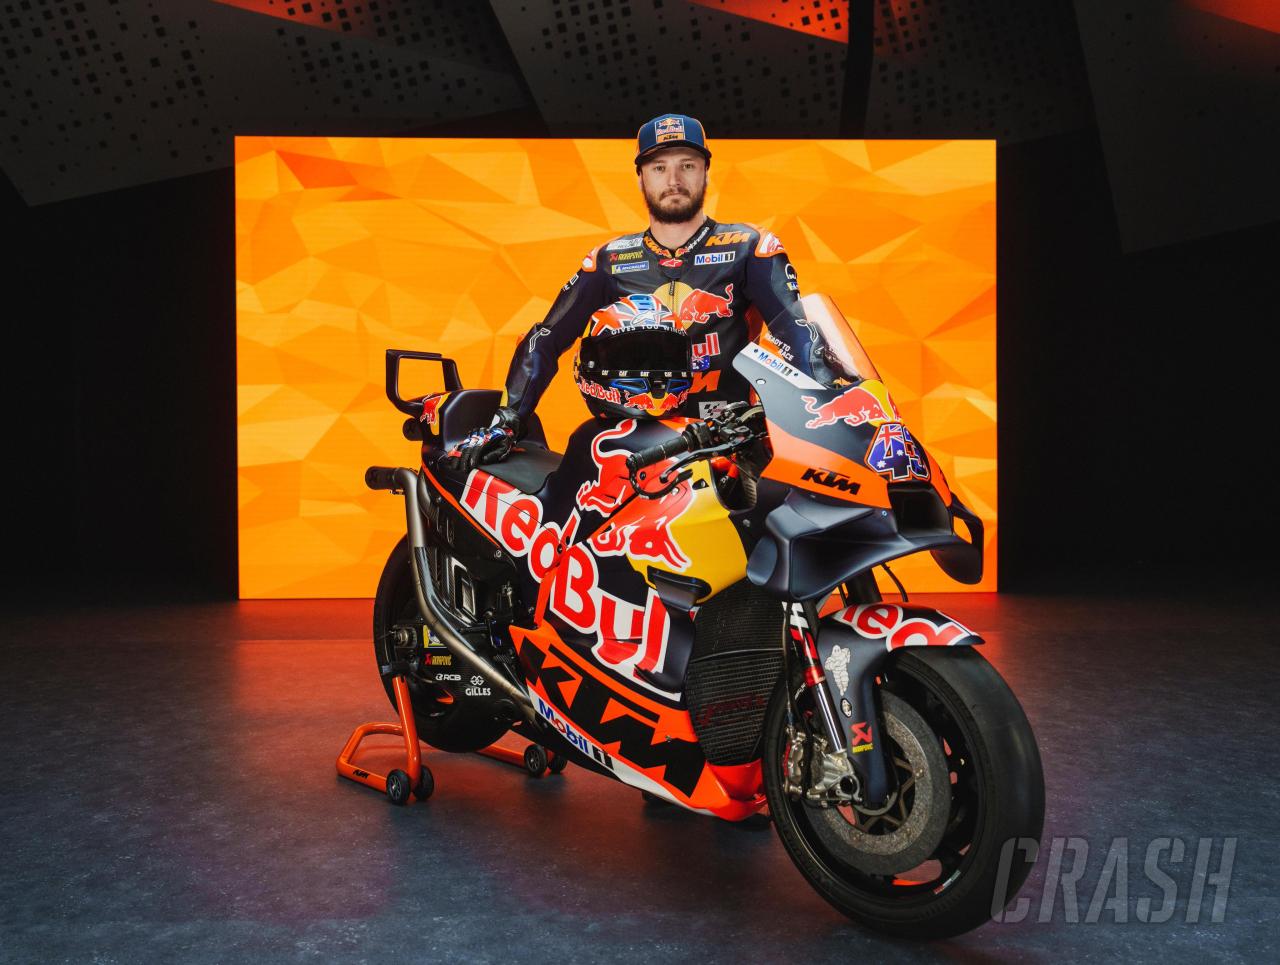 Jack Miller’s warning to Ducati: “KTM second on the list, soon to be first”